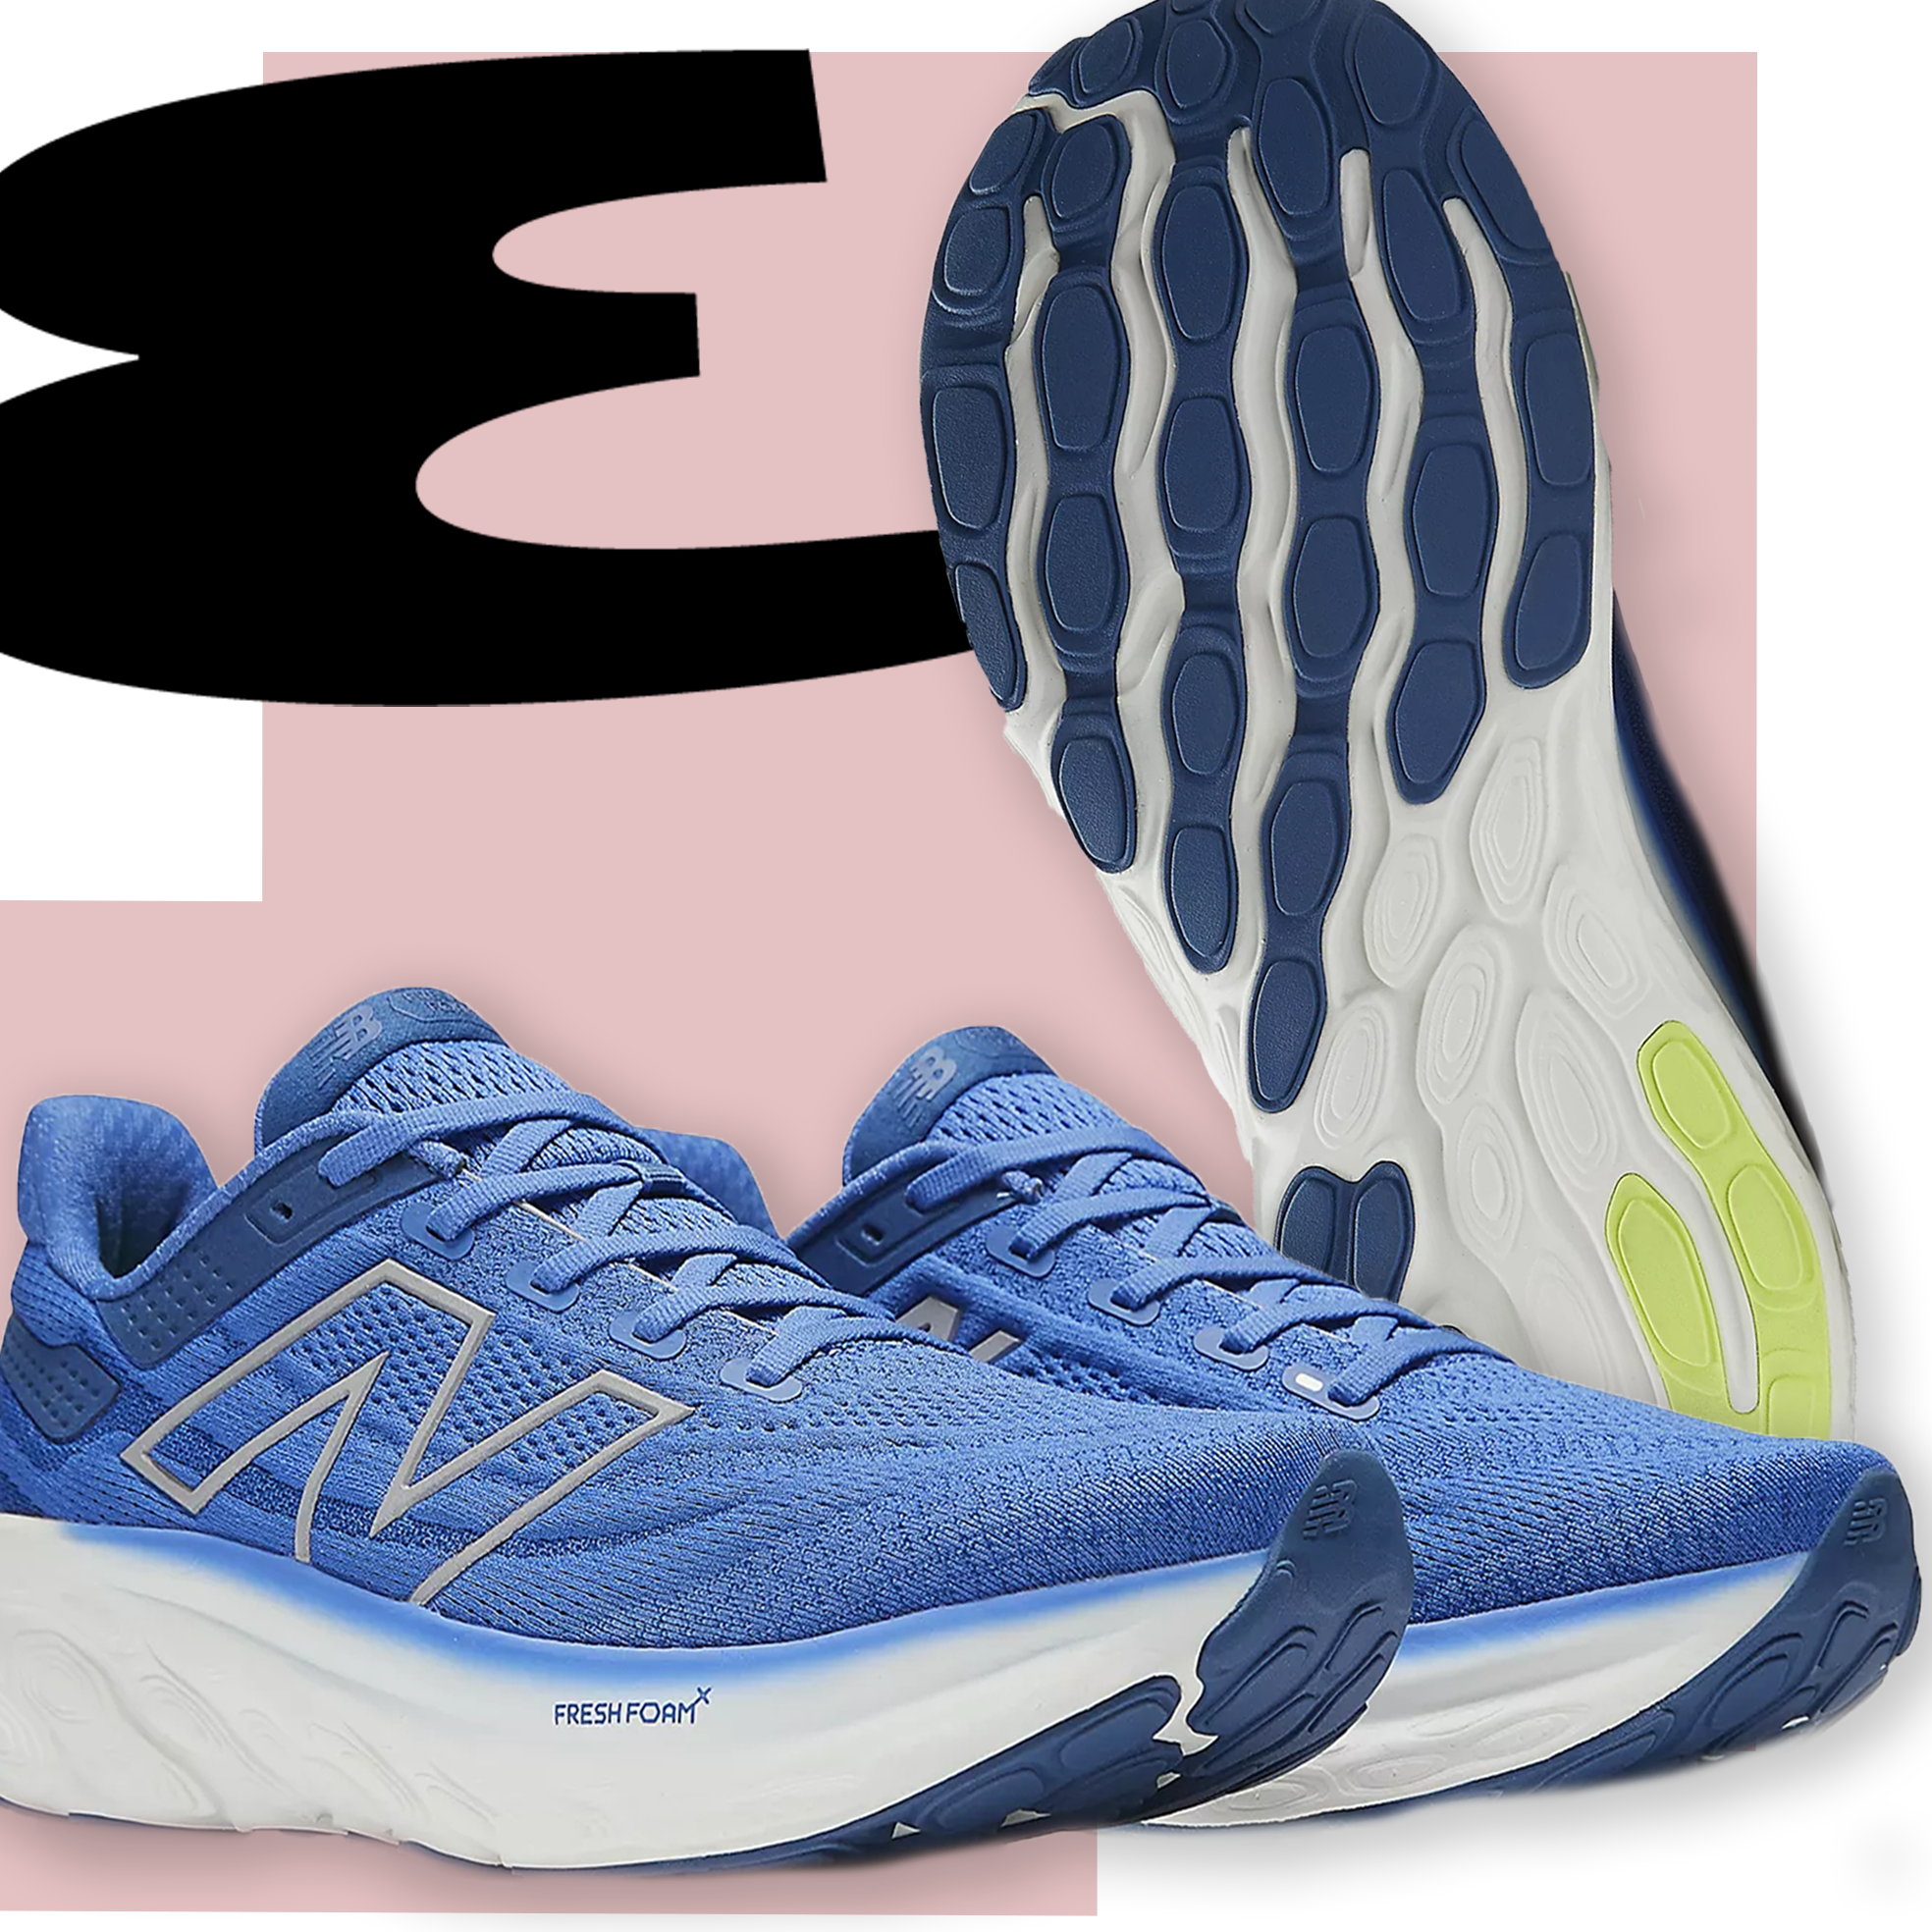 The 7 Best New Balance Running Shoes for Going Anywhere and Everywhere